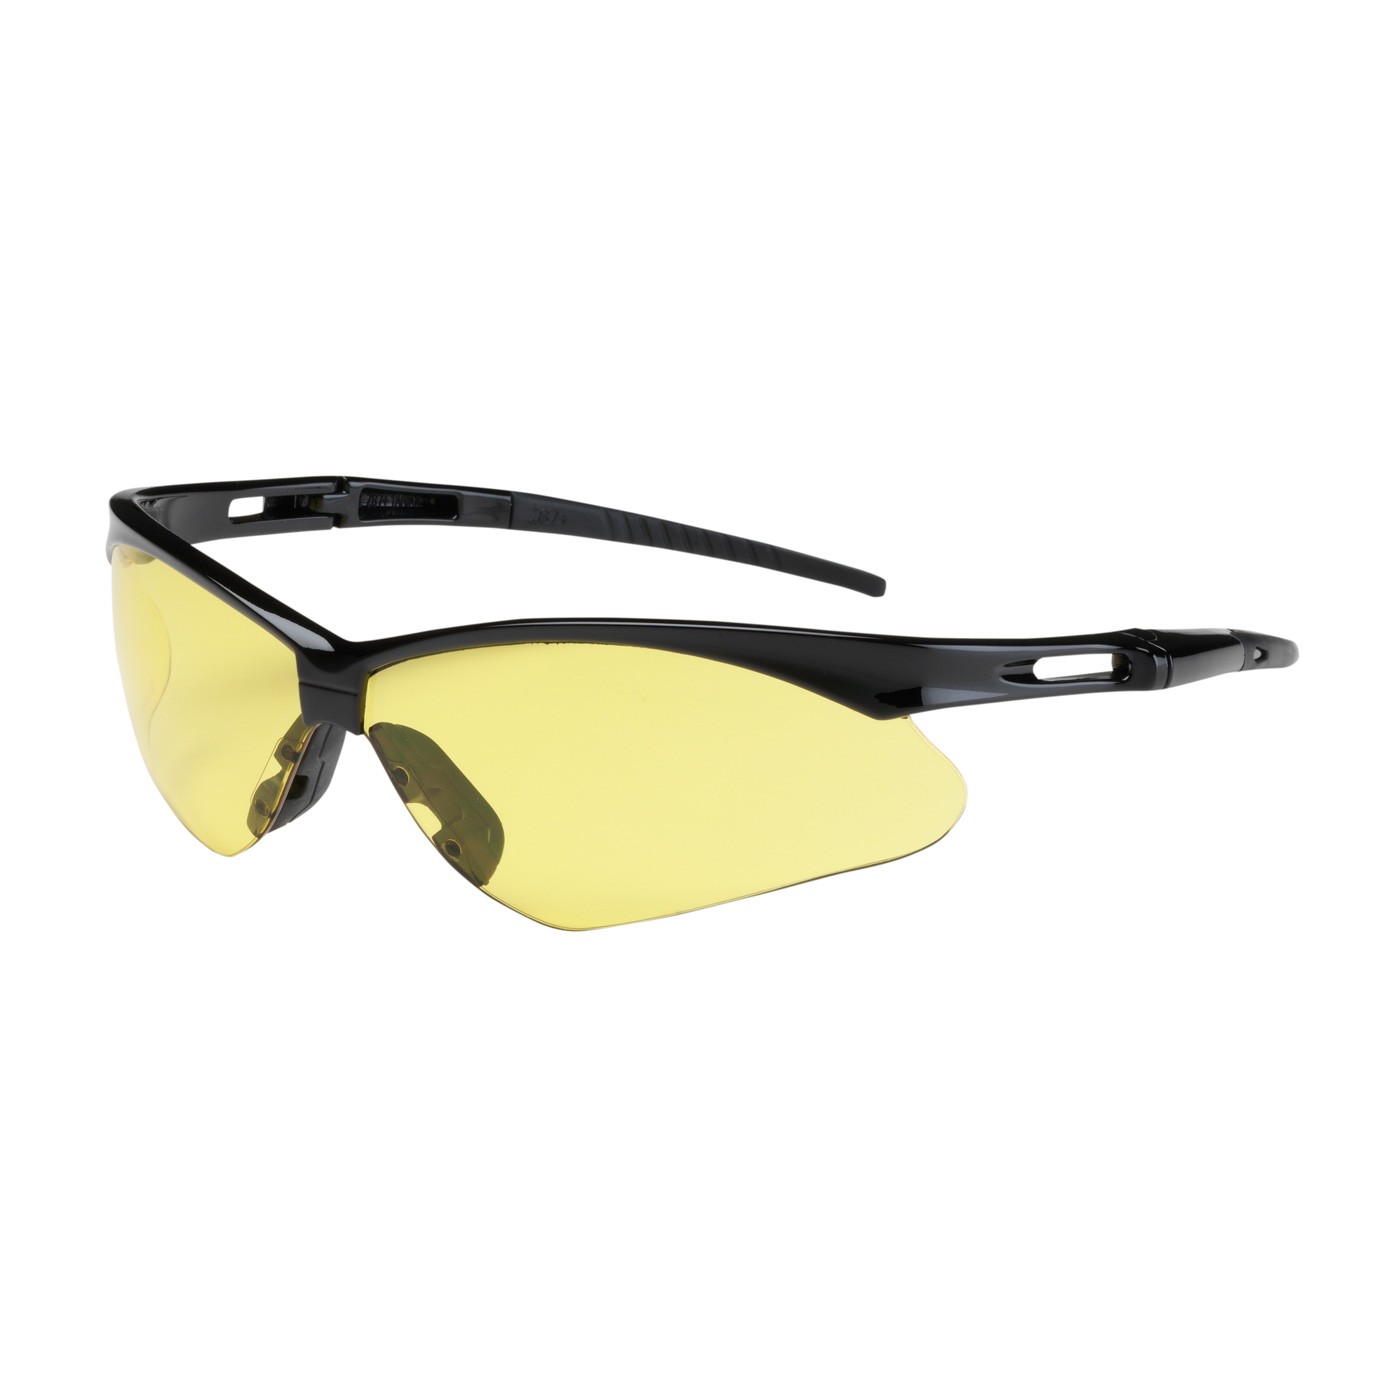 Anser™ Semi-Rimless Safety Glasses with Black Frame, Amber Lens and Anti-Scratch Coating  (#250-AN-10120)